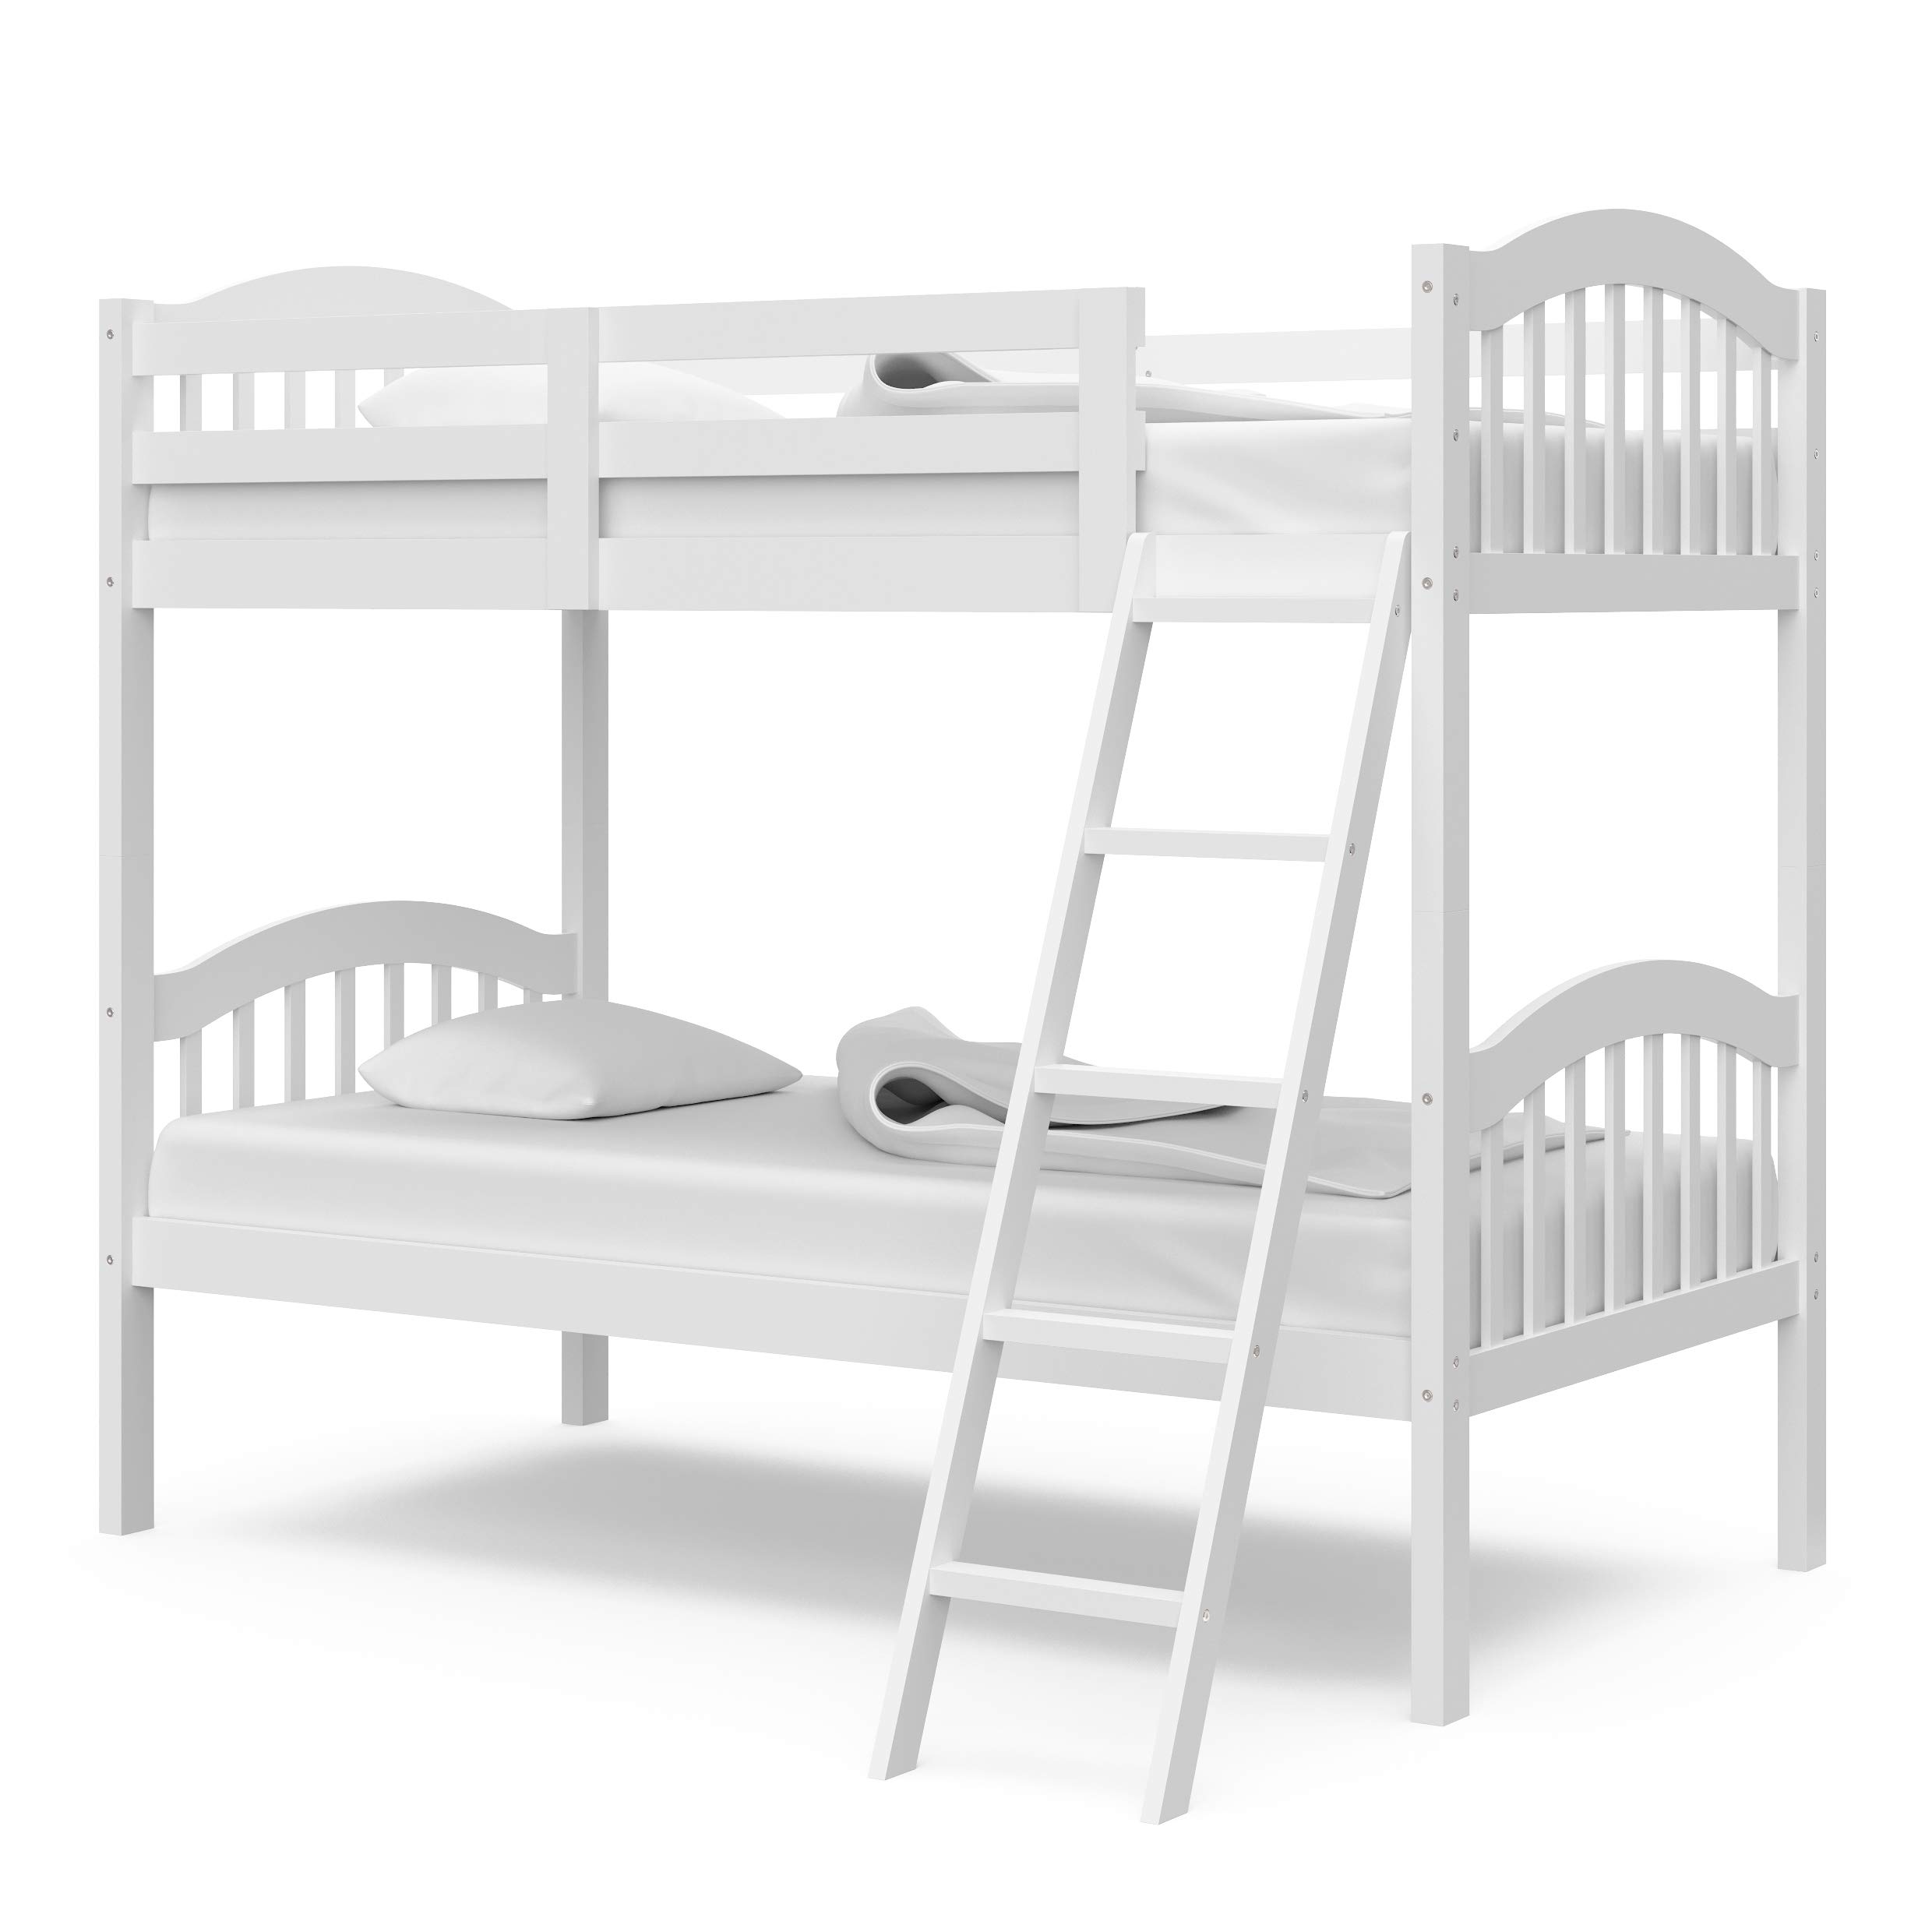 Book Cover Storkcraft Long Horn Solid Hardwood Twin Bunk Bed, White Twin Bunk Beds for Kids with Ladder and Safety Rail White 1 Count (Pack of 1)